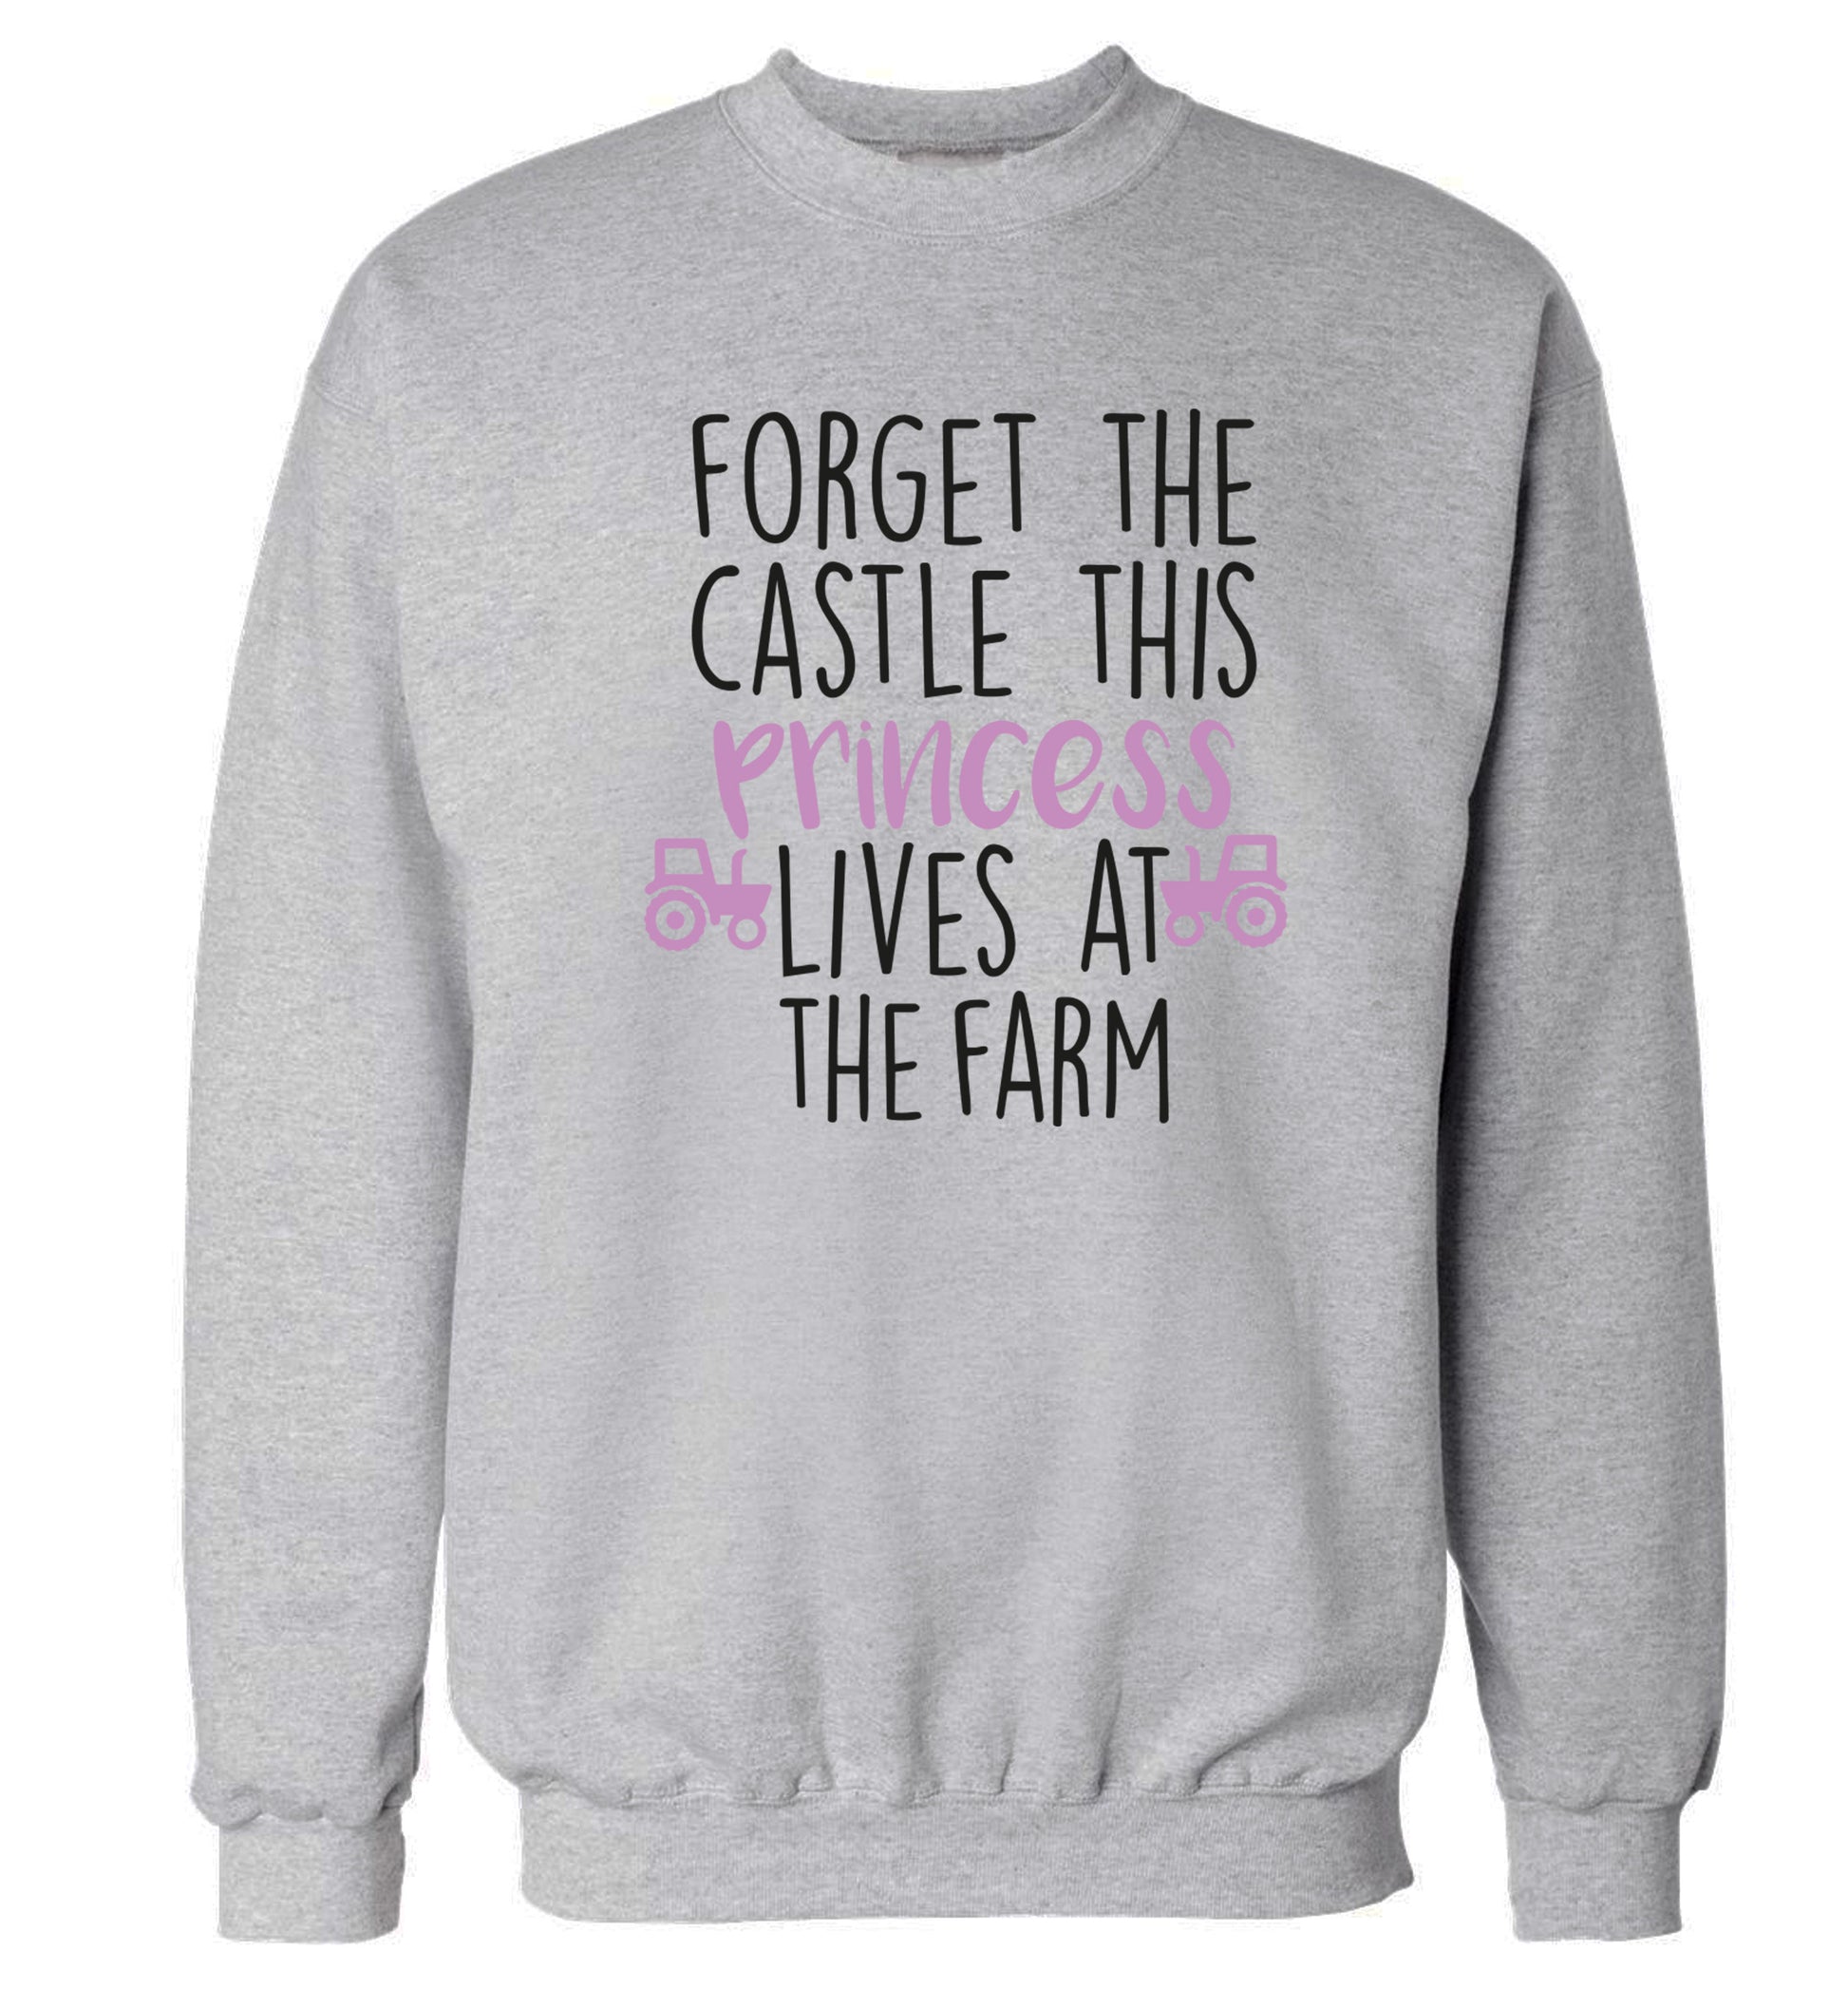 Forget the castle this princess lives at the farm Adult's unisex grey Sweater 2XL